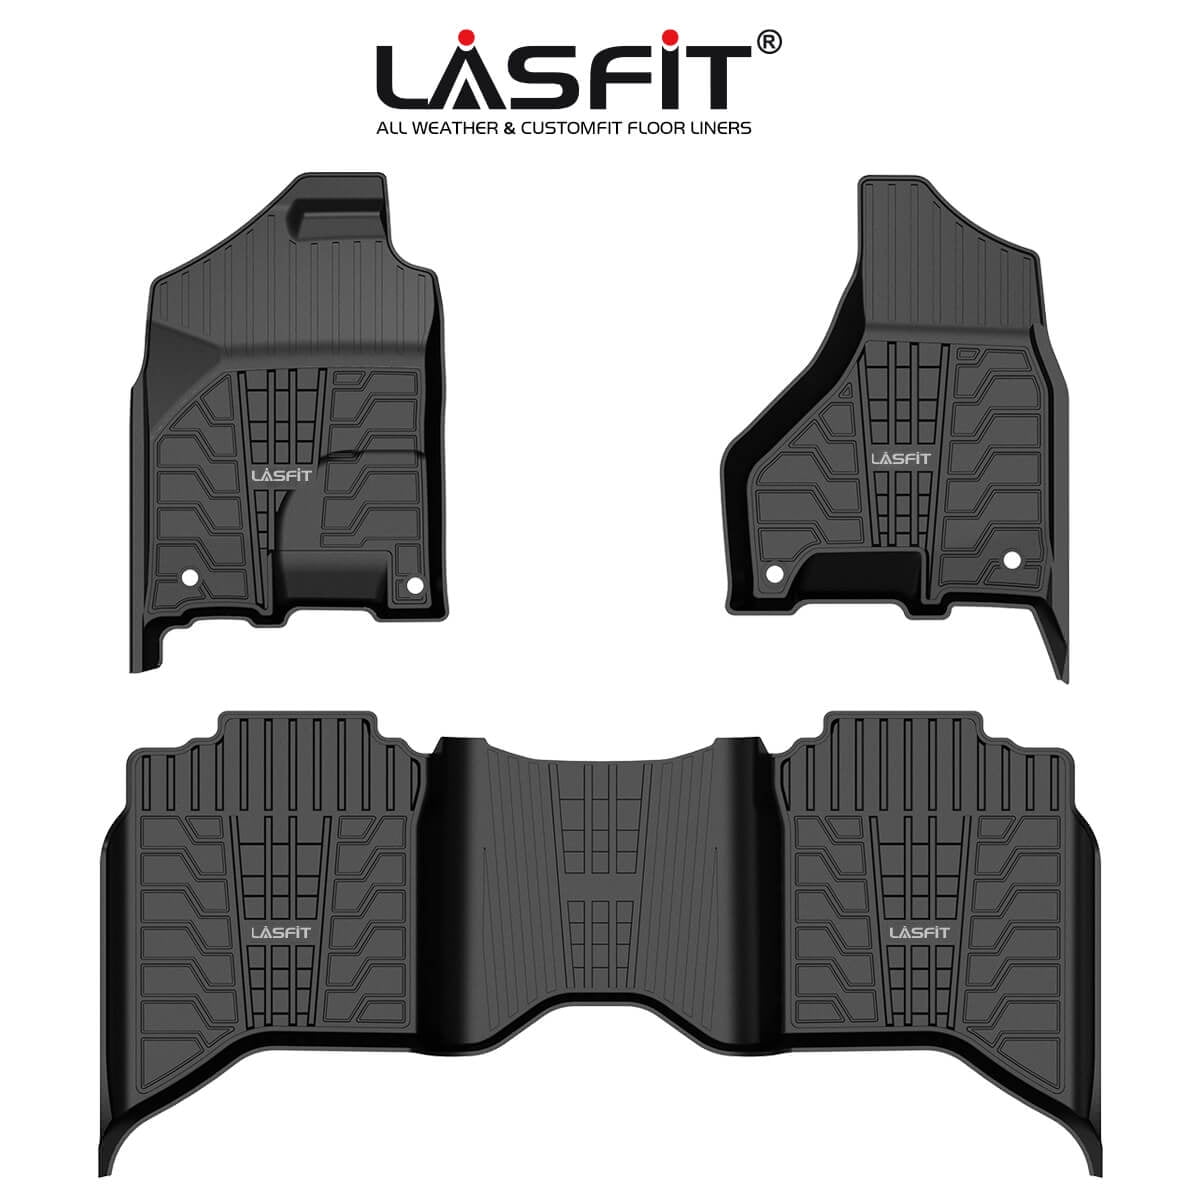 How To Clean And Maintain Lasfit All-weather Custom Fit, 53% OFF